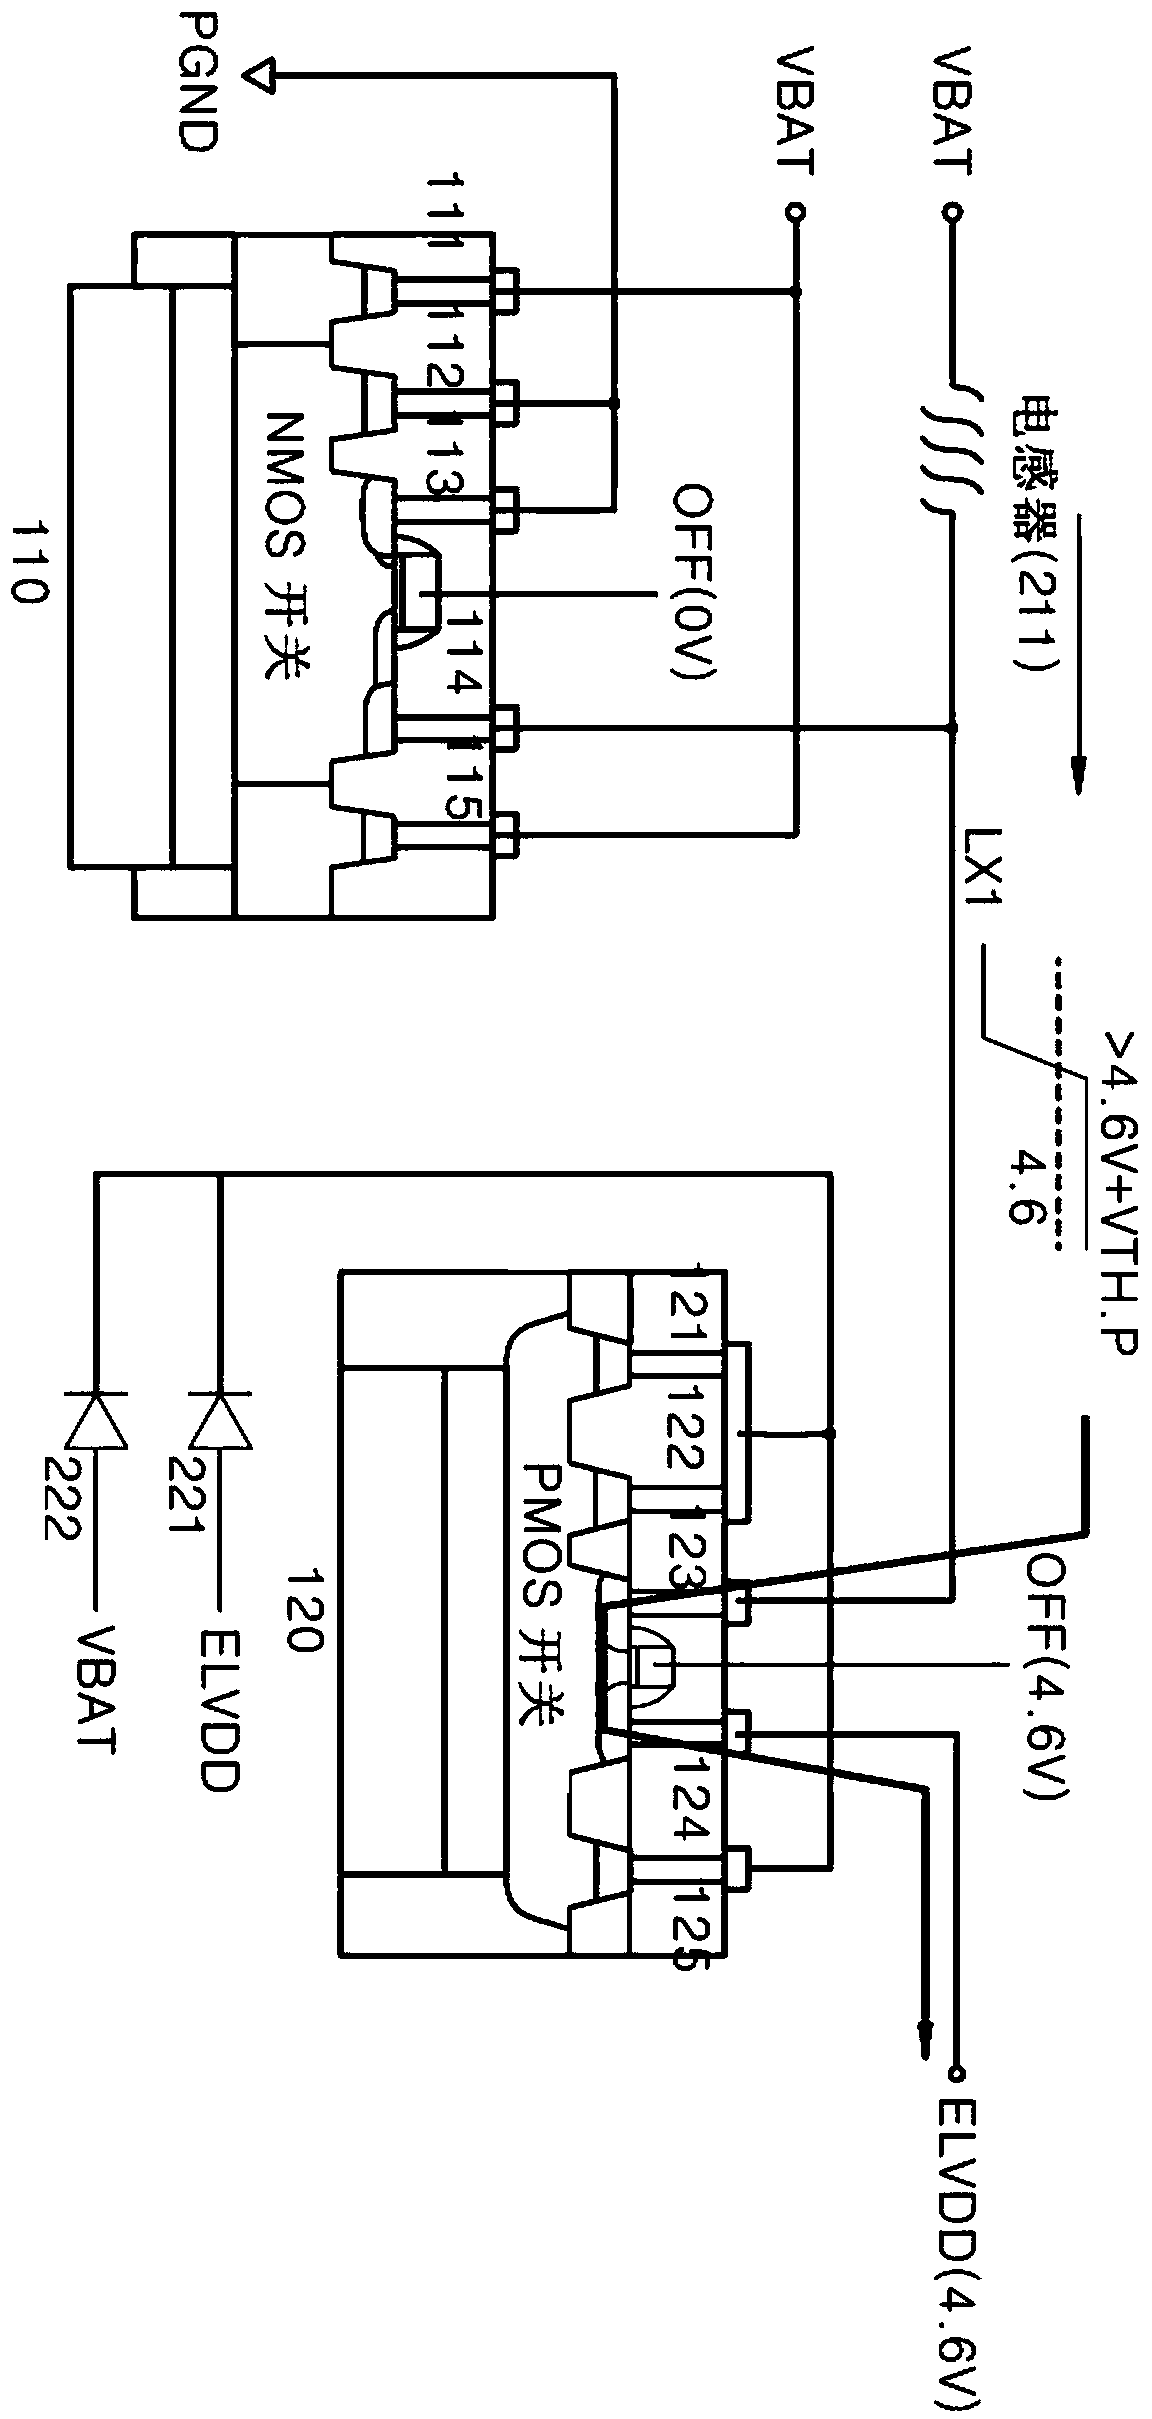 Dc-dc converter having device dealing with change in input voltage